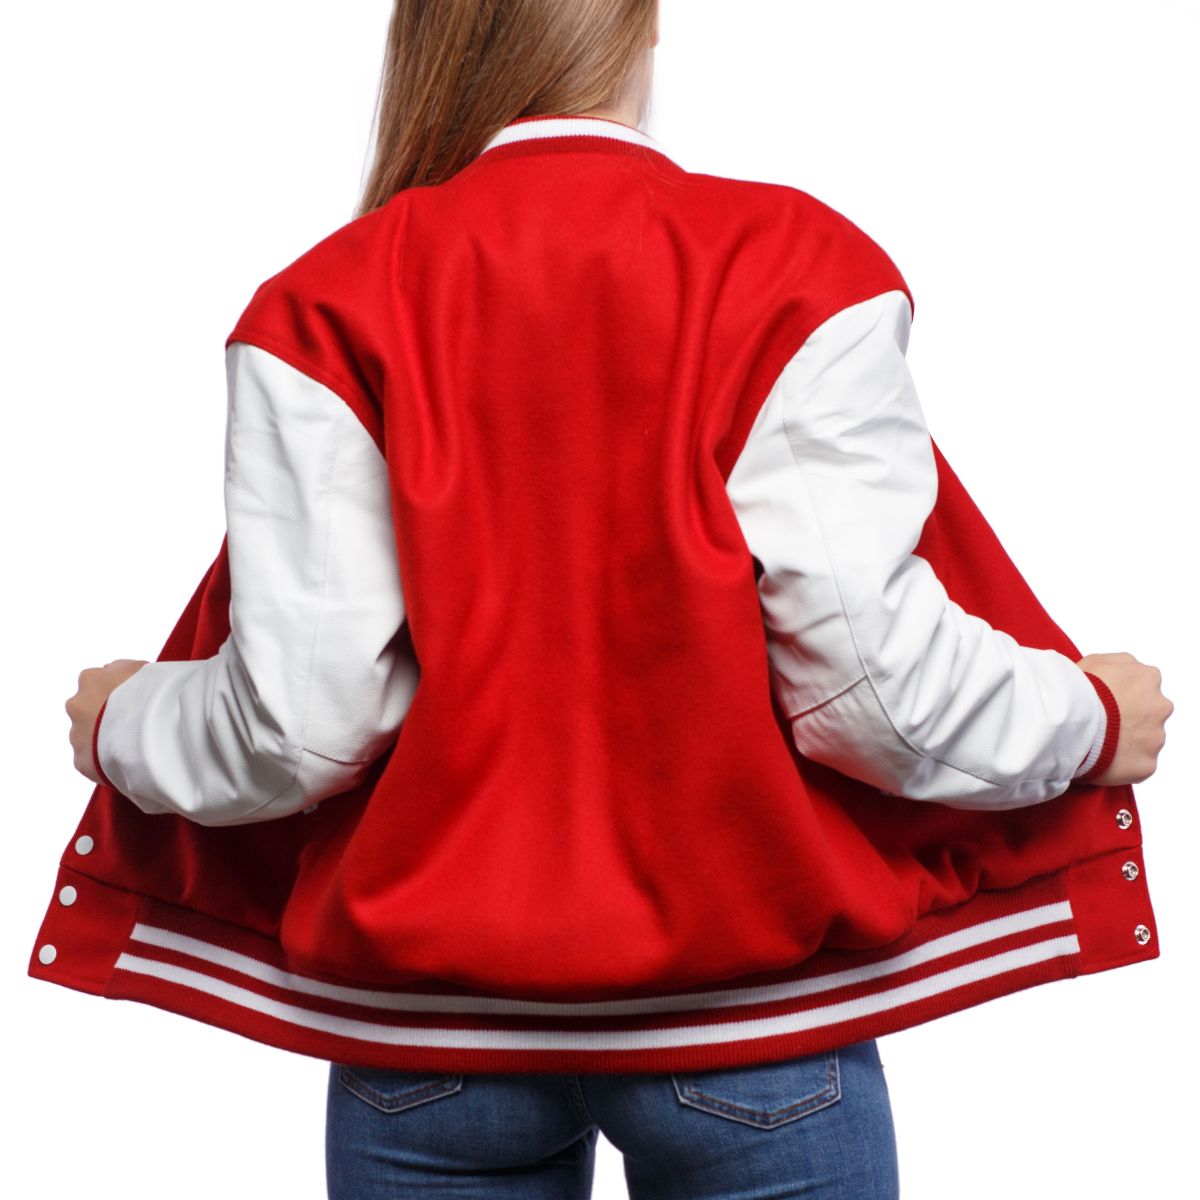 Final Sale Plus Size Plain Varsity Jacket in Red and White